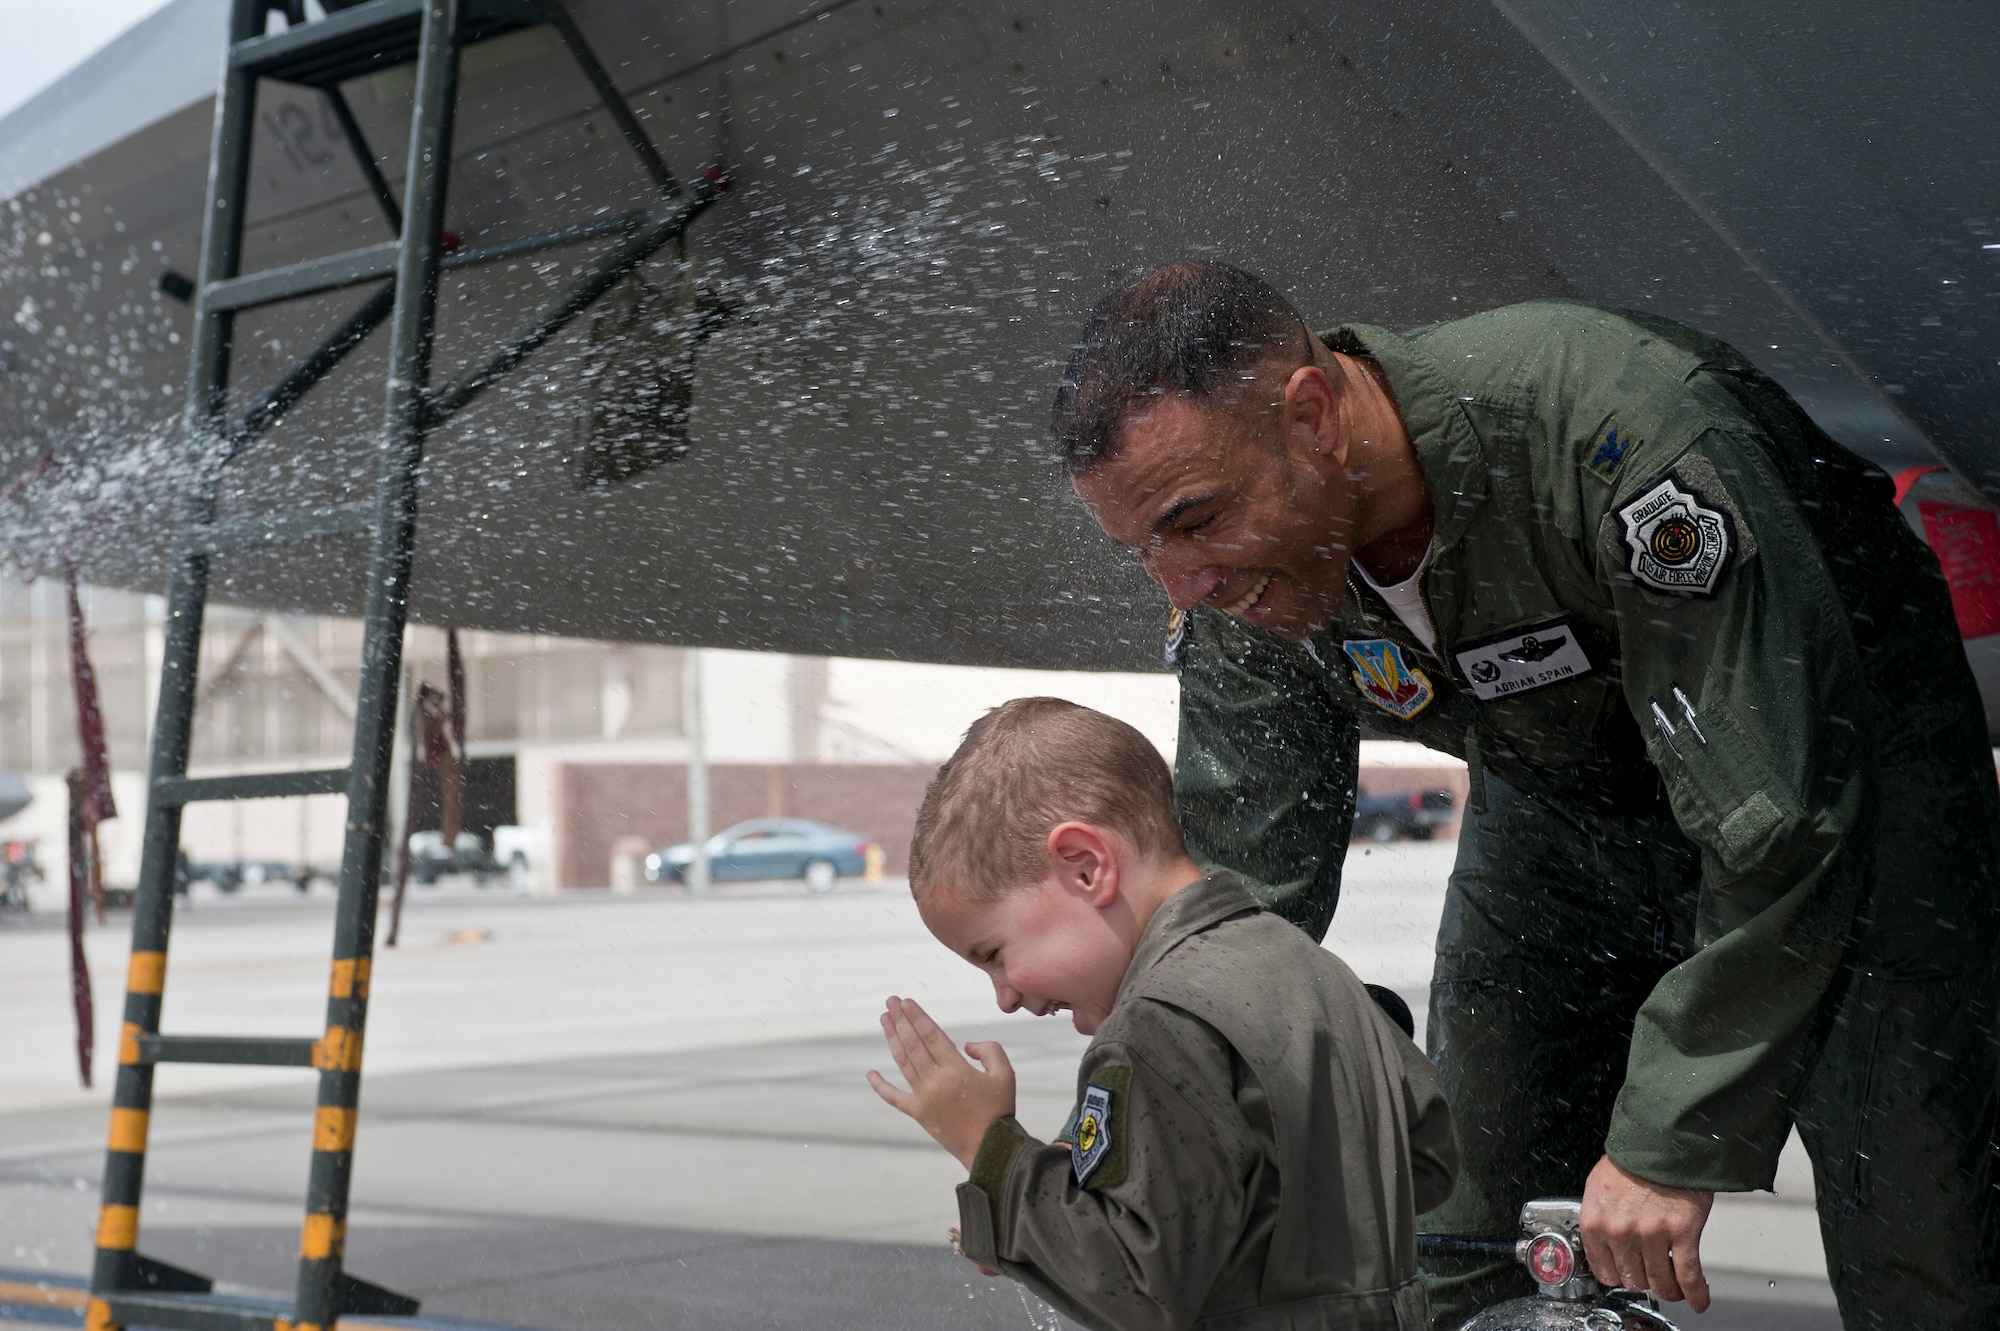 Col. Adrian Spain, U.S. Air Force Weapons School commandant, attempts to grab his son while being hosed down after his final flight as the USAFWS commandant at Nellis Air Force Base, Nev., May 11, 2015. It is tradition to dose the departing pilot with water upon their arrival back from their final flight. (U.S. Air Force photo by Staff Sgt. Siuta B. Ika)